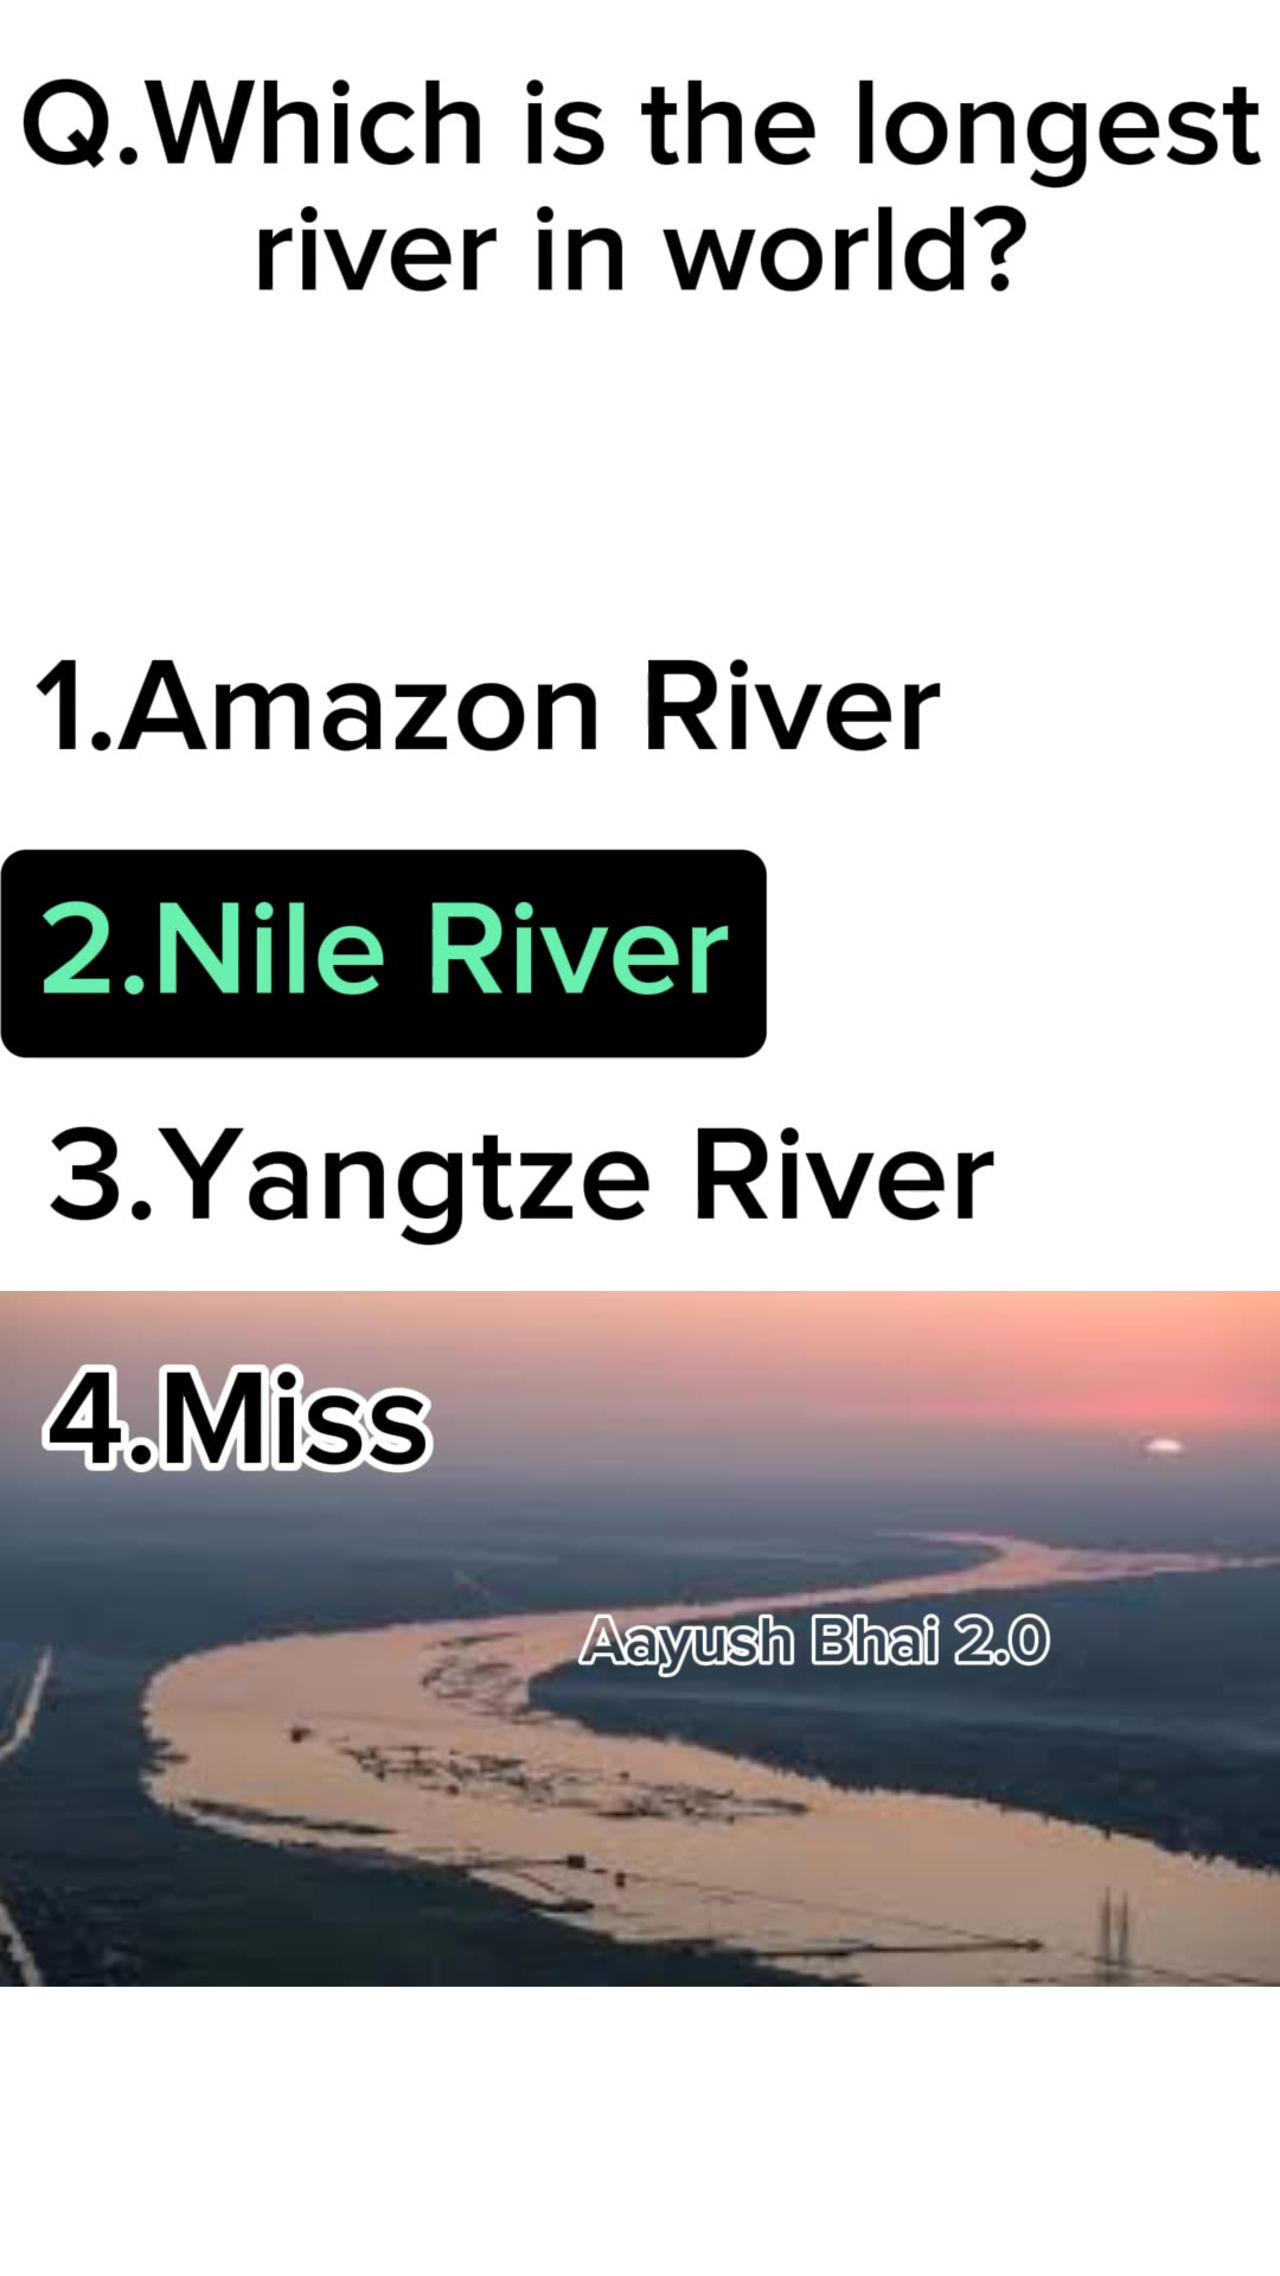 What is the longest river in world??